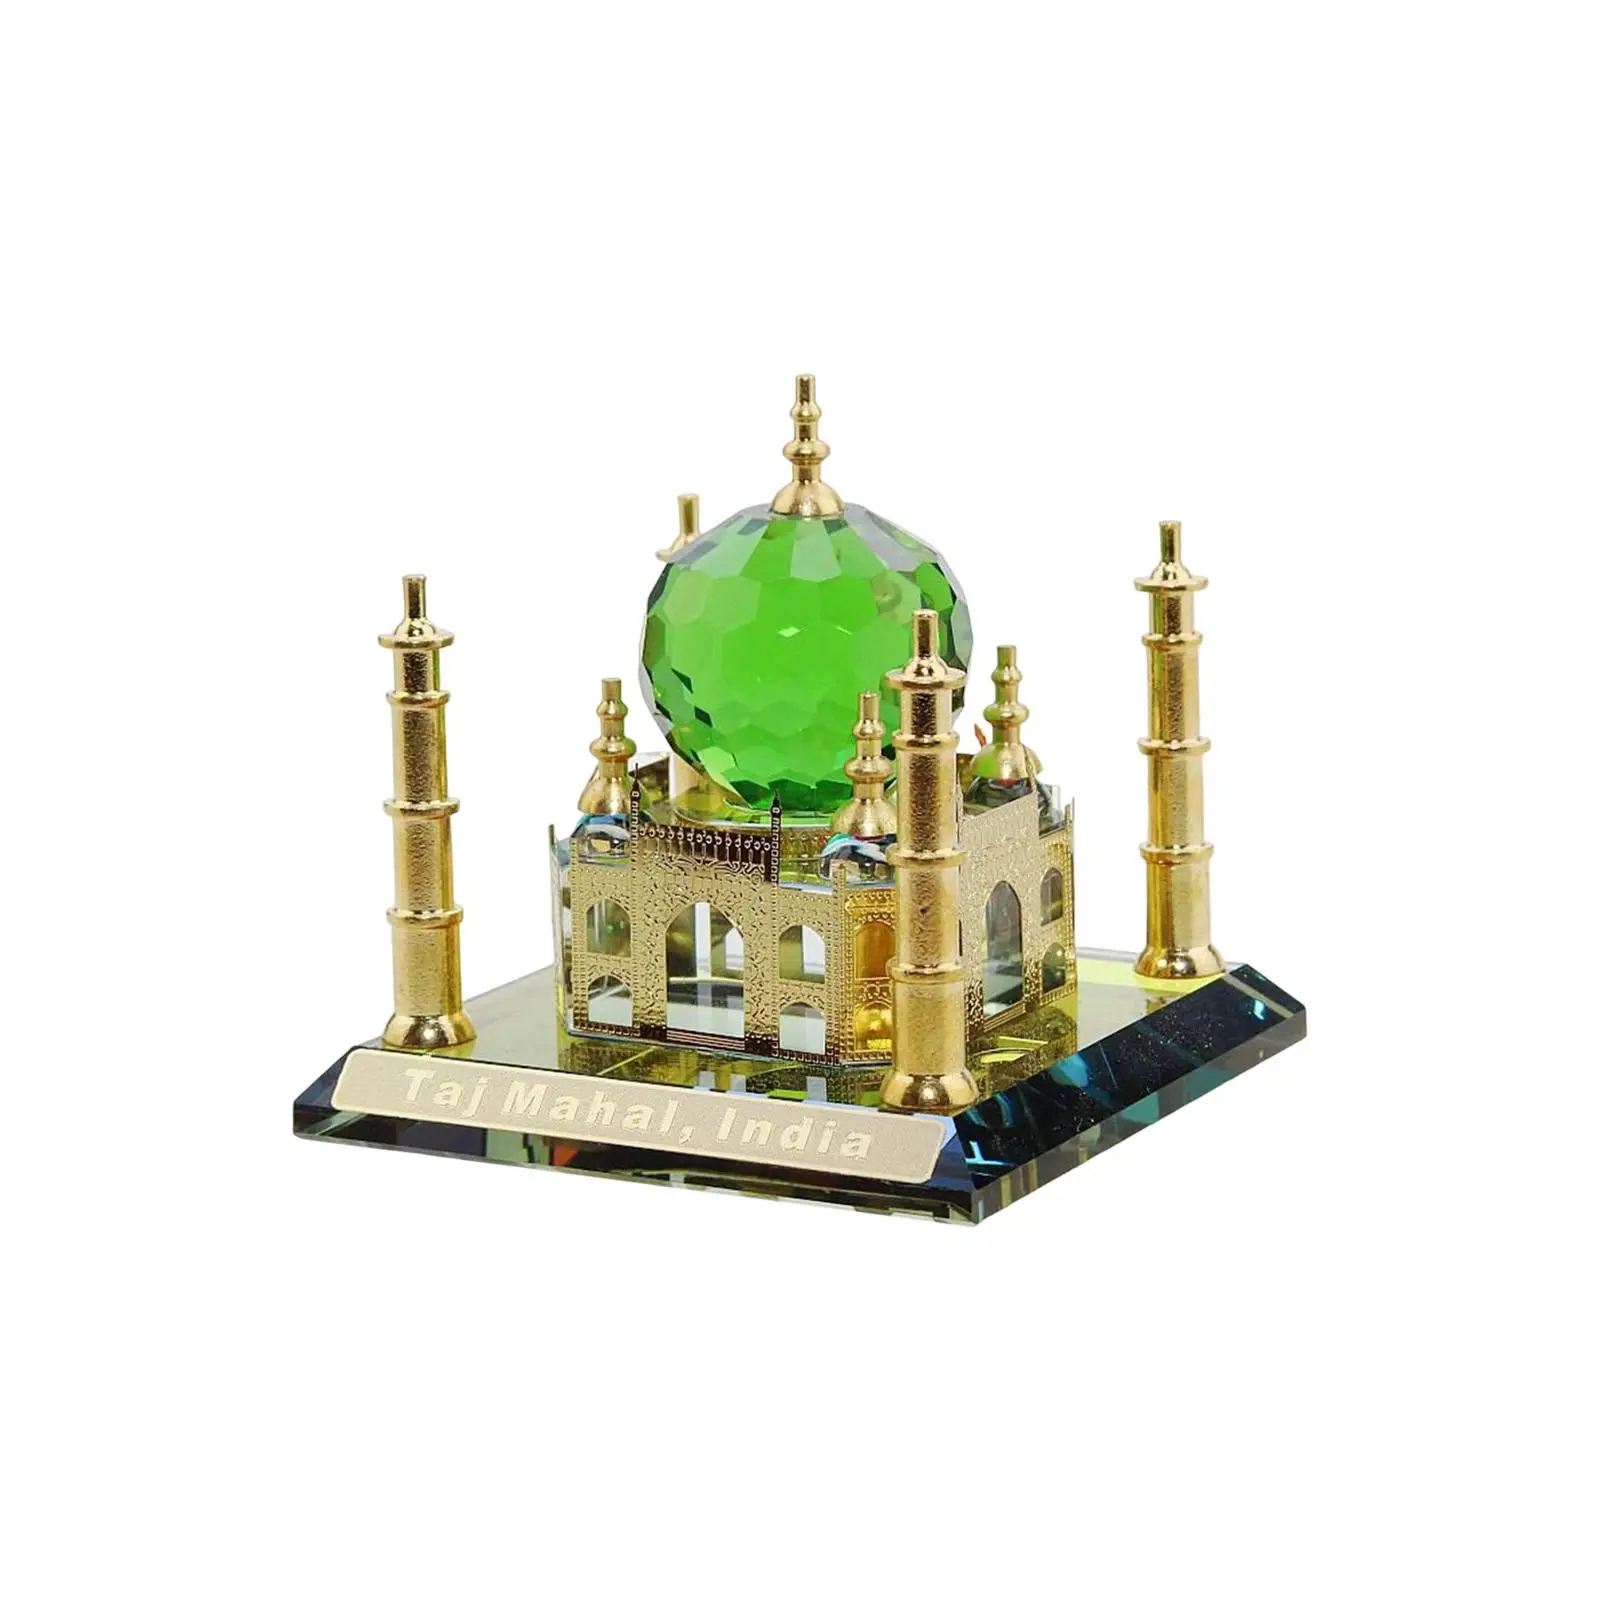 

Mosque Model Table Artwork Mosque Miniature Model Islamic Showpiece Car Dashboard for Fireplace Office Decorations Home Holidays